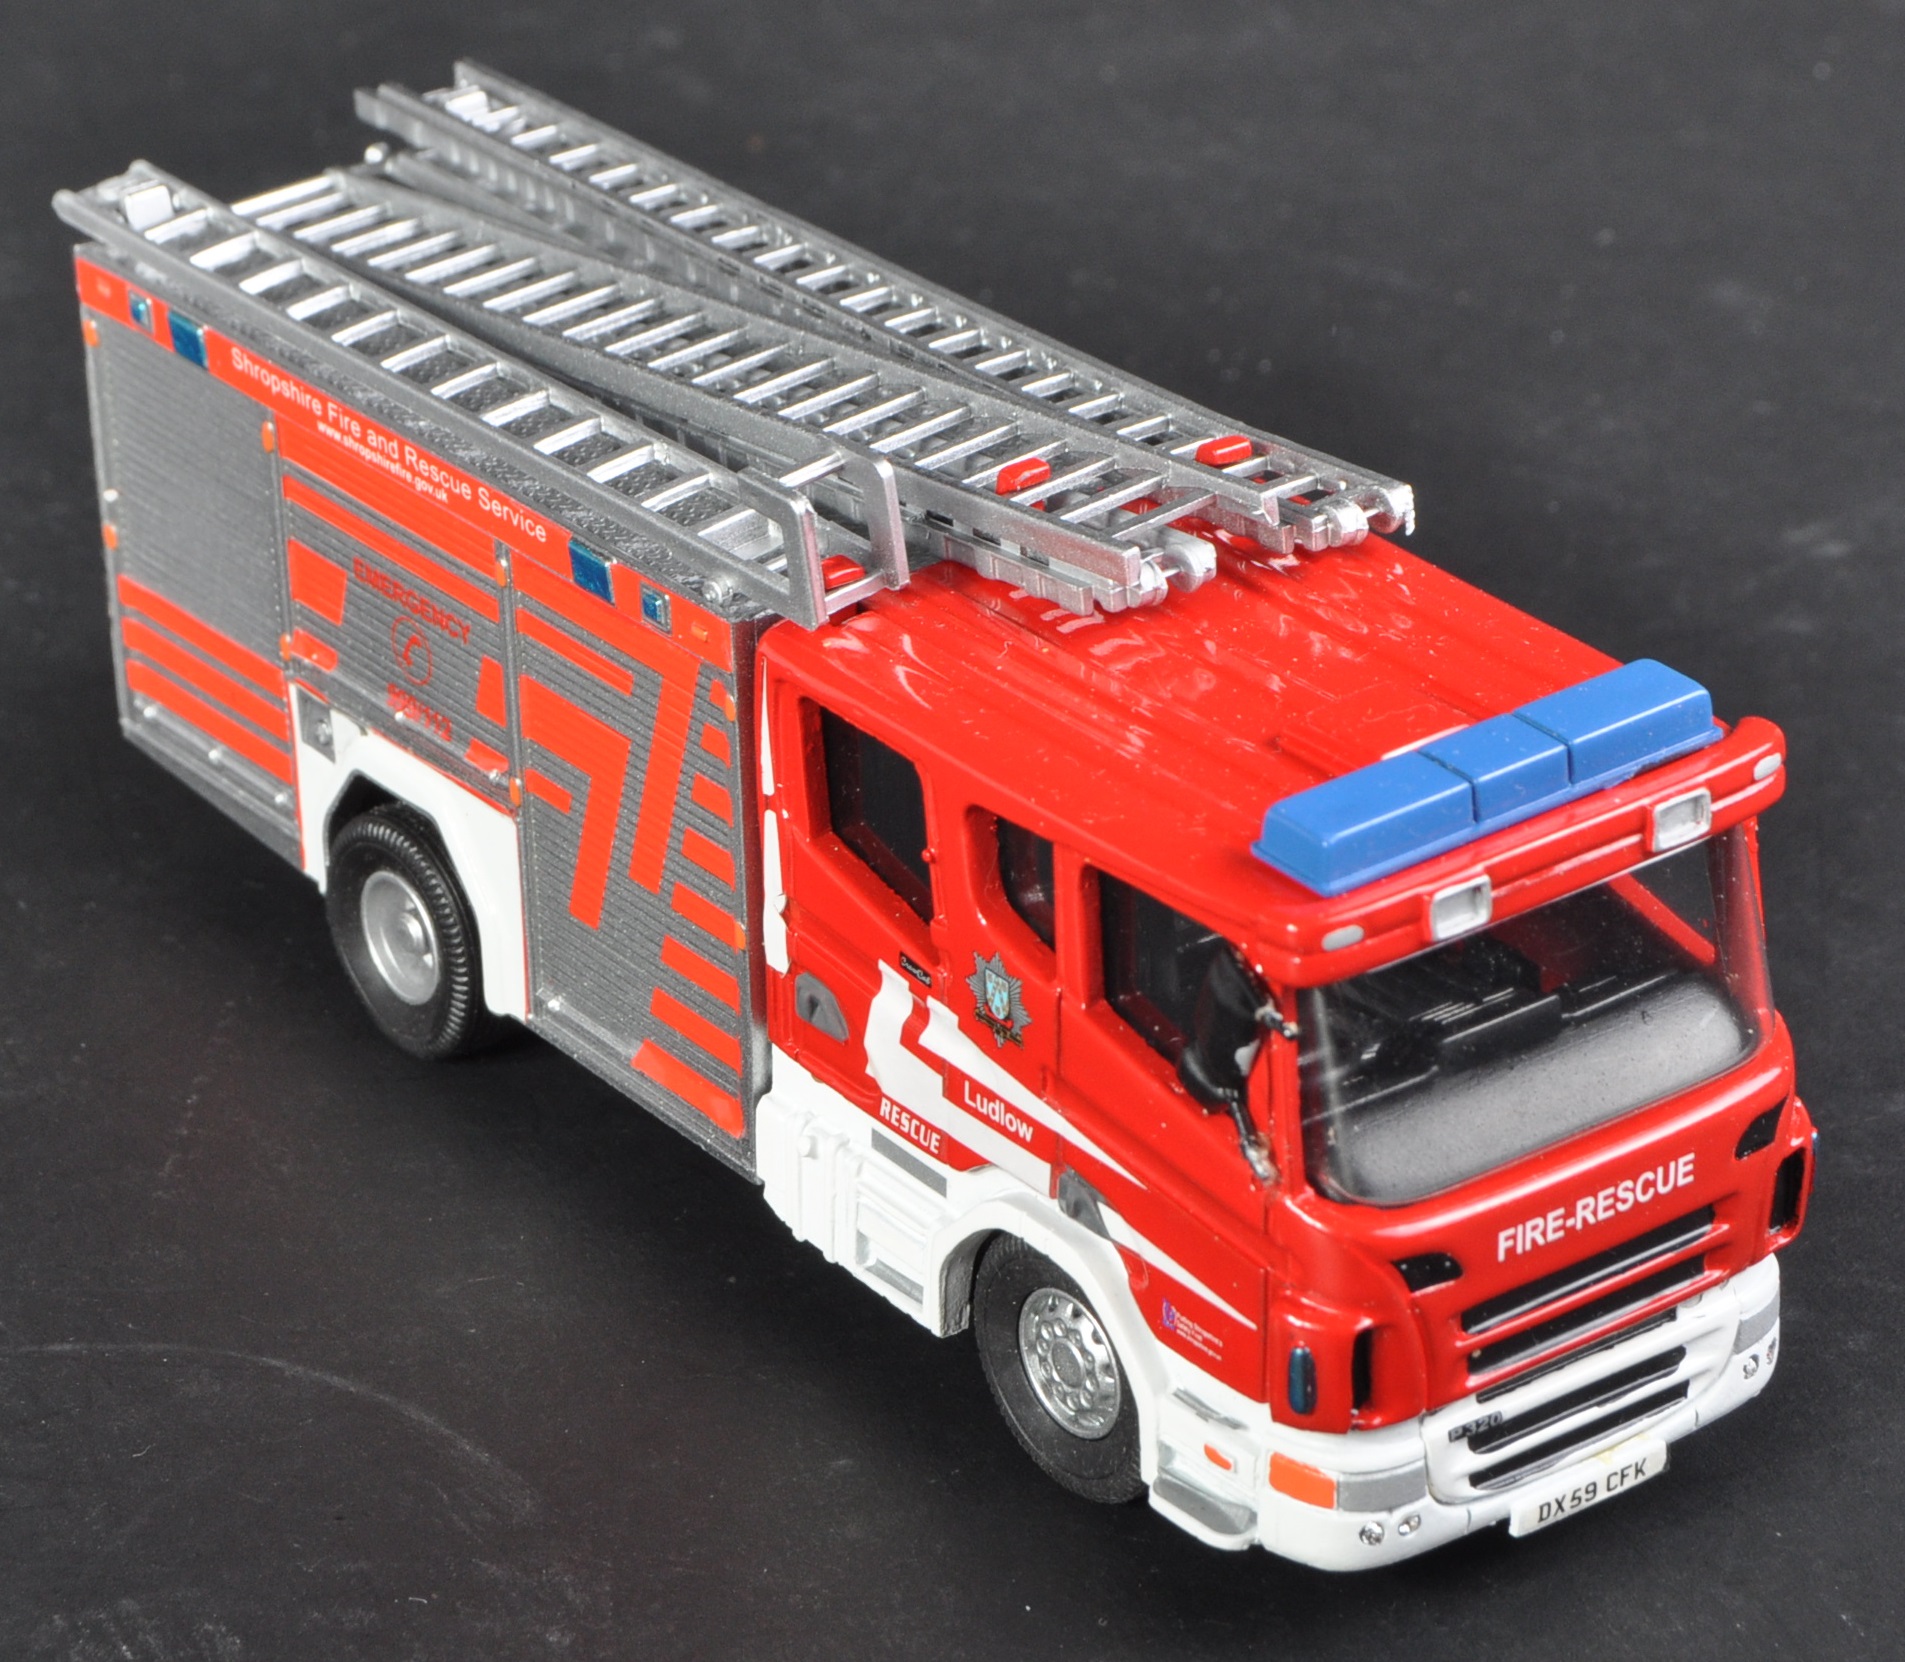 FIRE BRIGADE MODELS 1/50 SCALE DIECAST MODEL FIRE ENGINE - Image 3 of 6